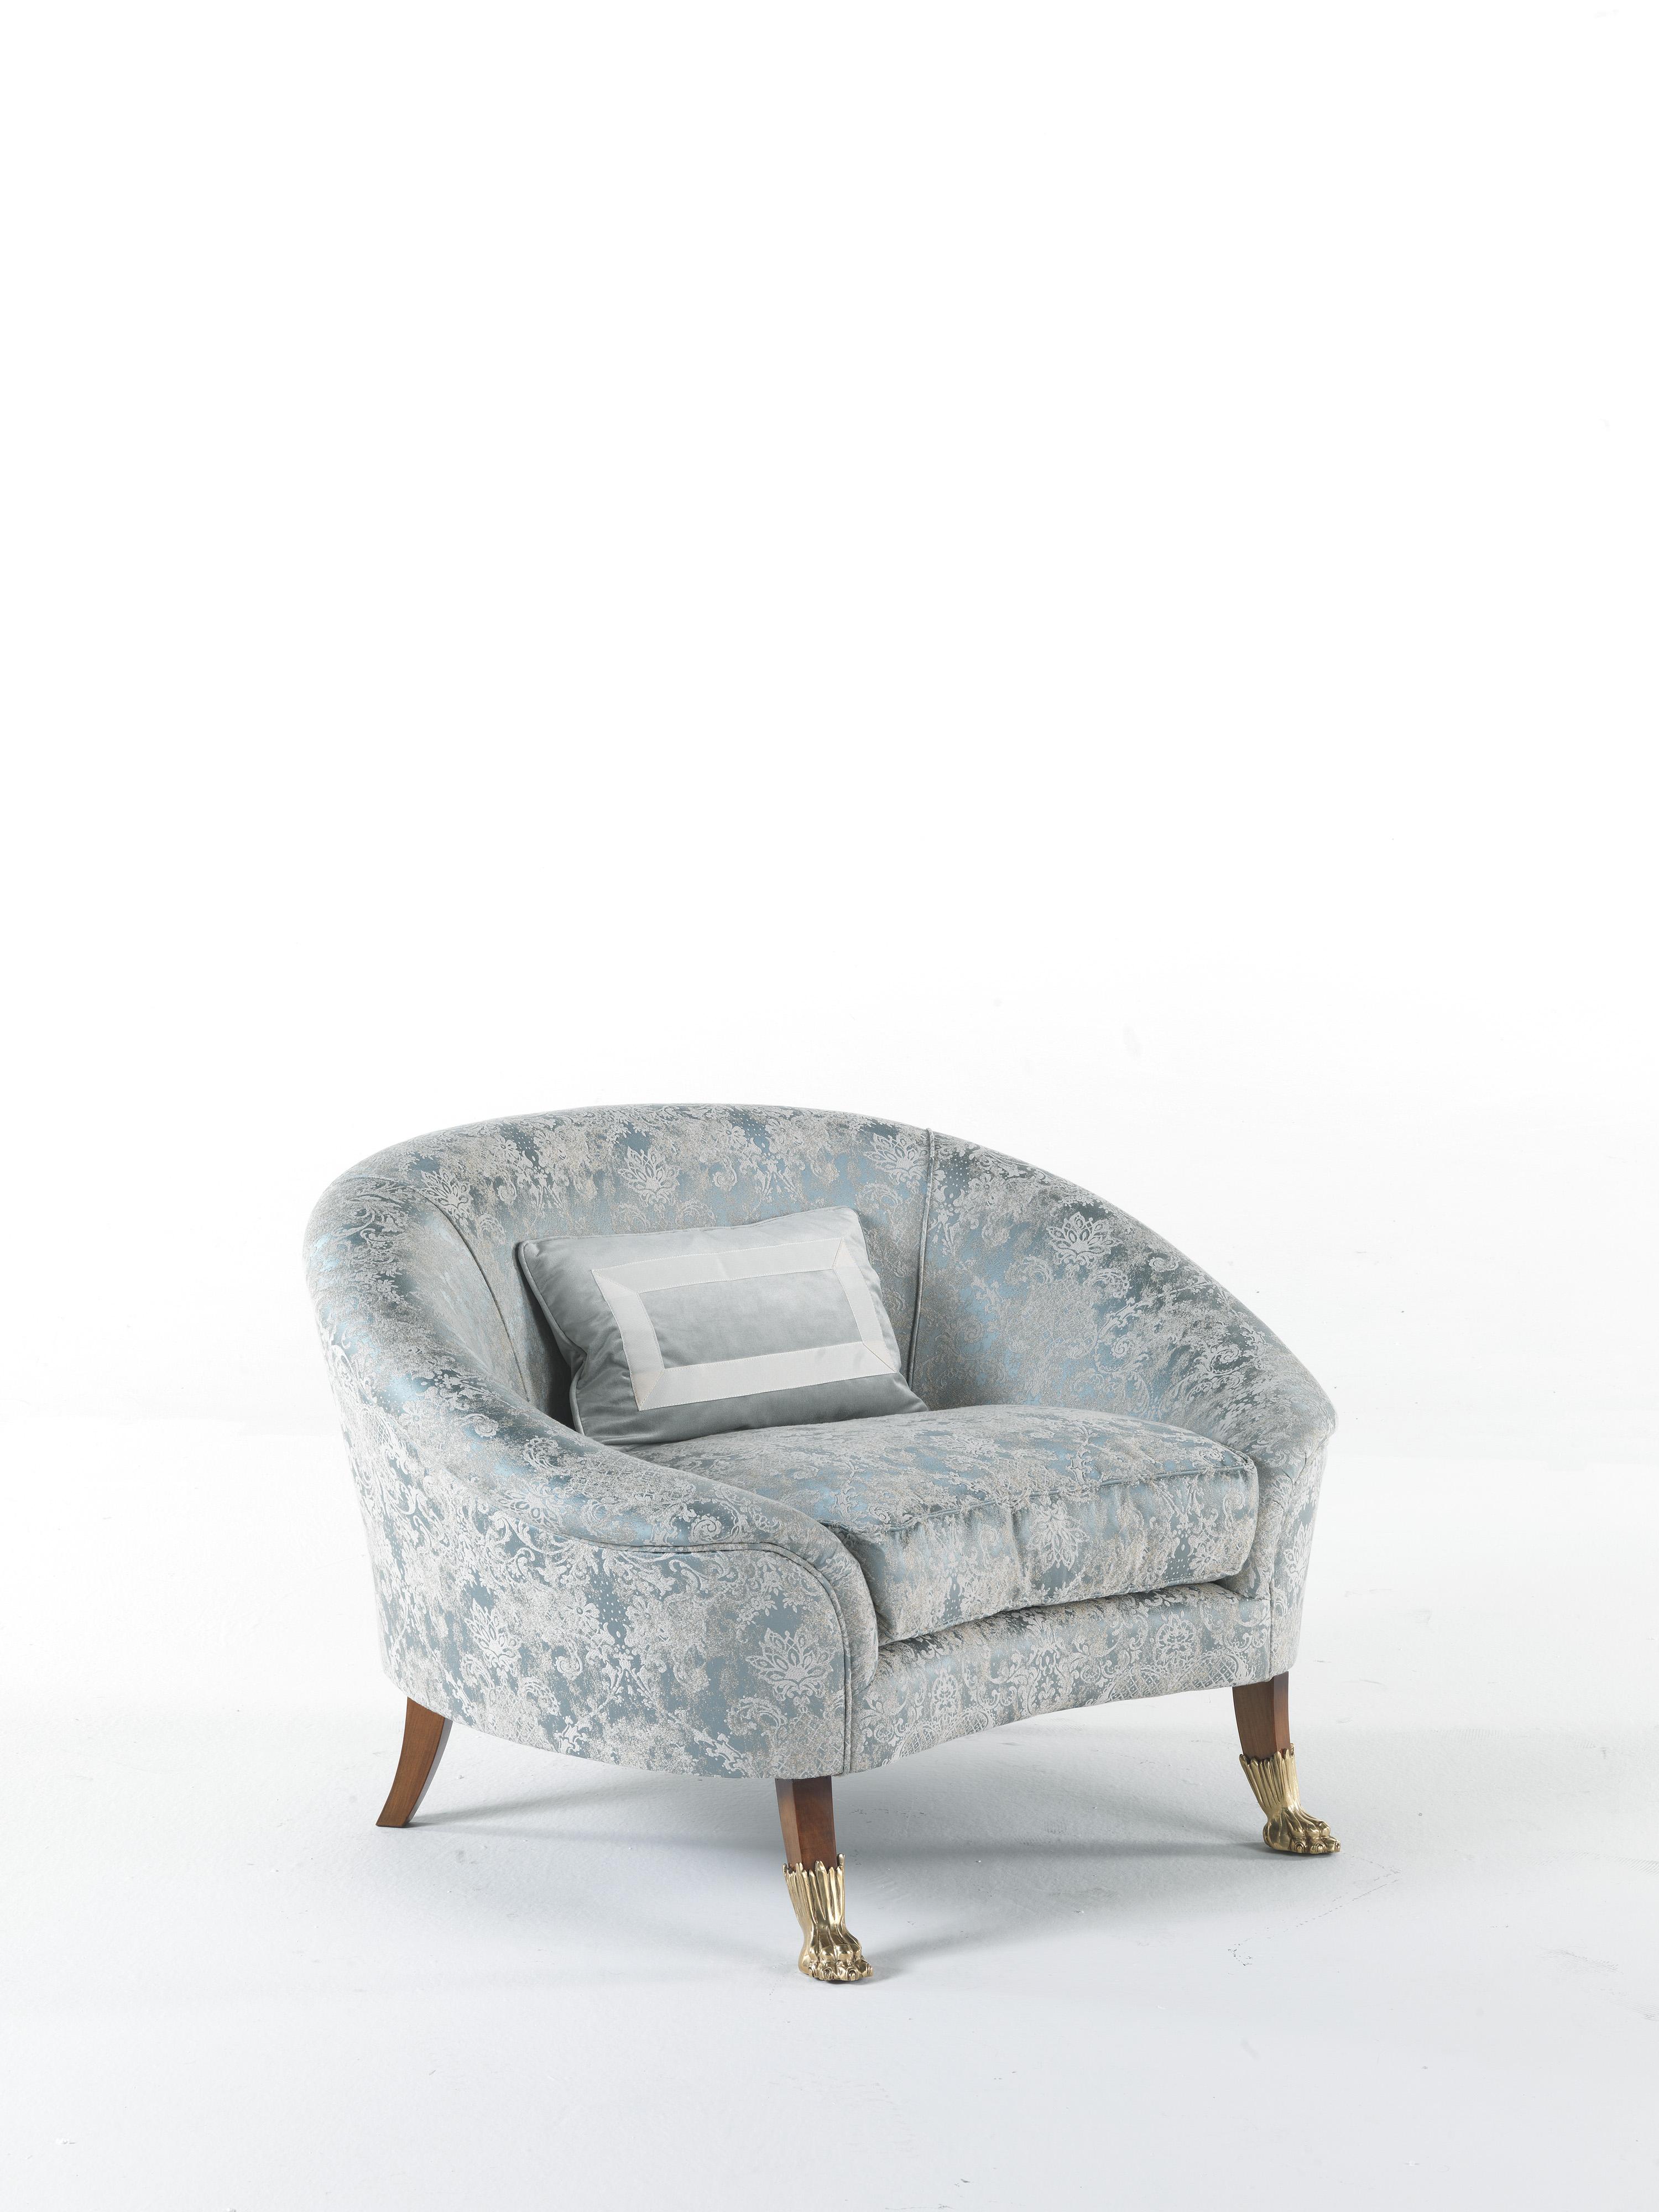 An egg-shaped armchair with harmonious lines, Harmonia is the perfect expression of a refined classic style. The armchair is characterized by feet with decorative details in brass and upholstery in precious fabrics from the collection.
Harmonia